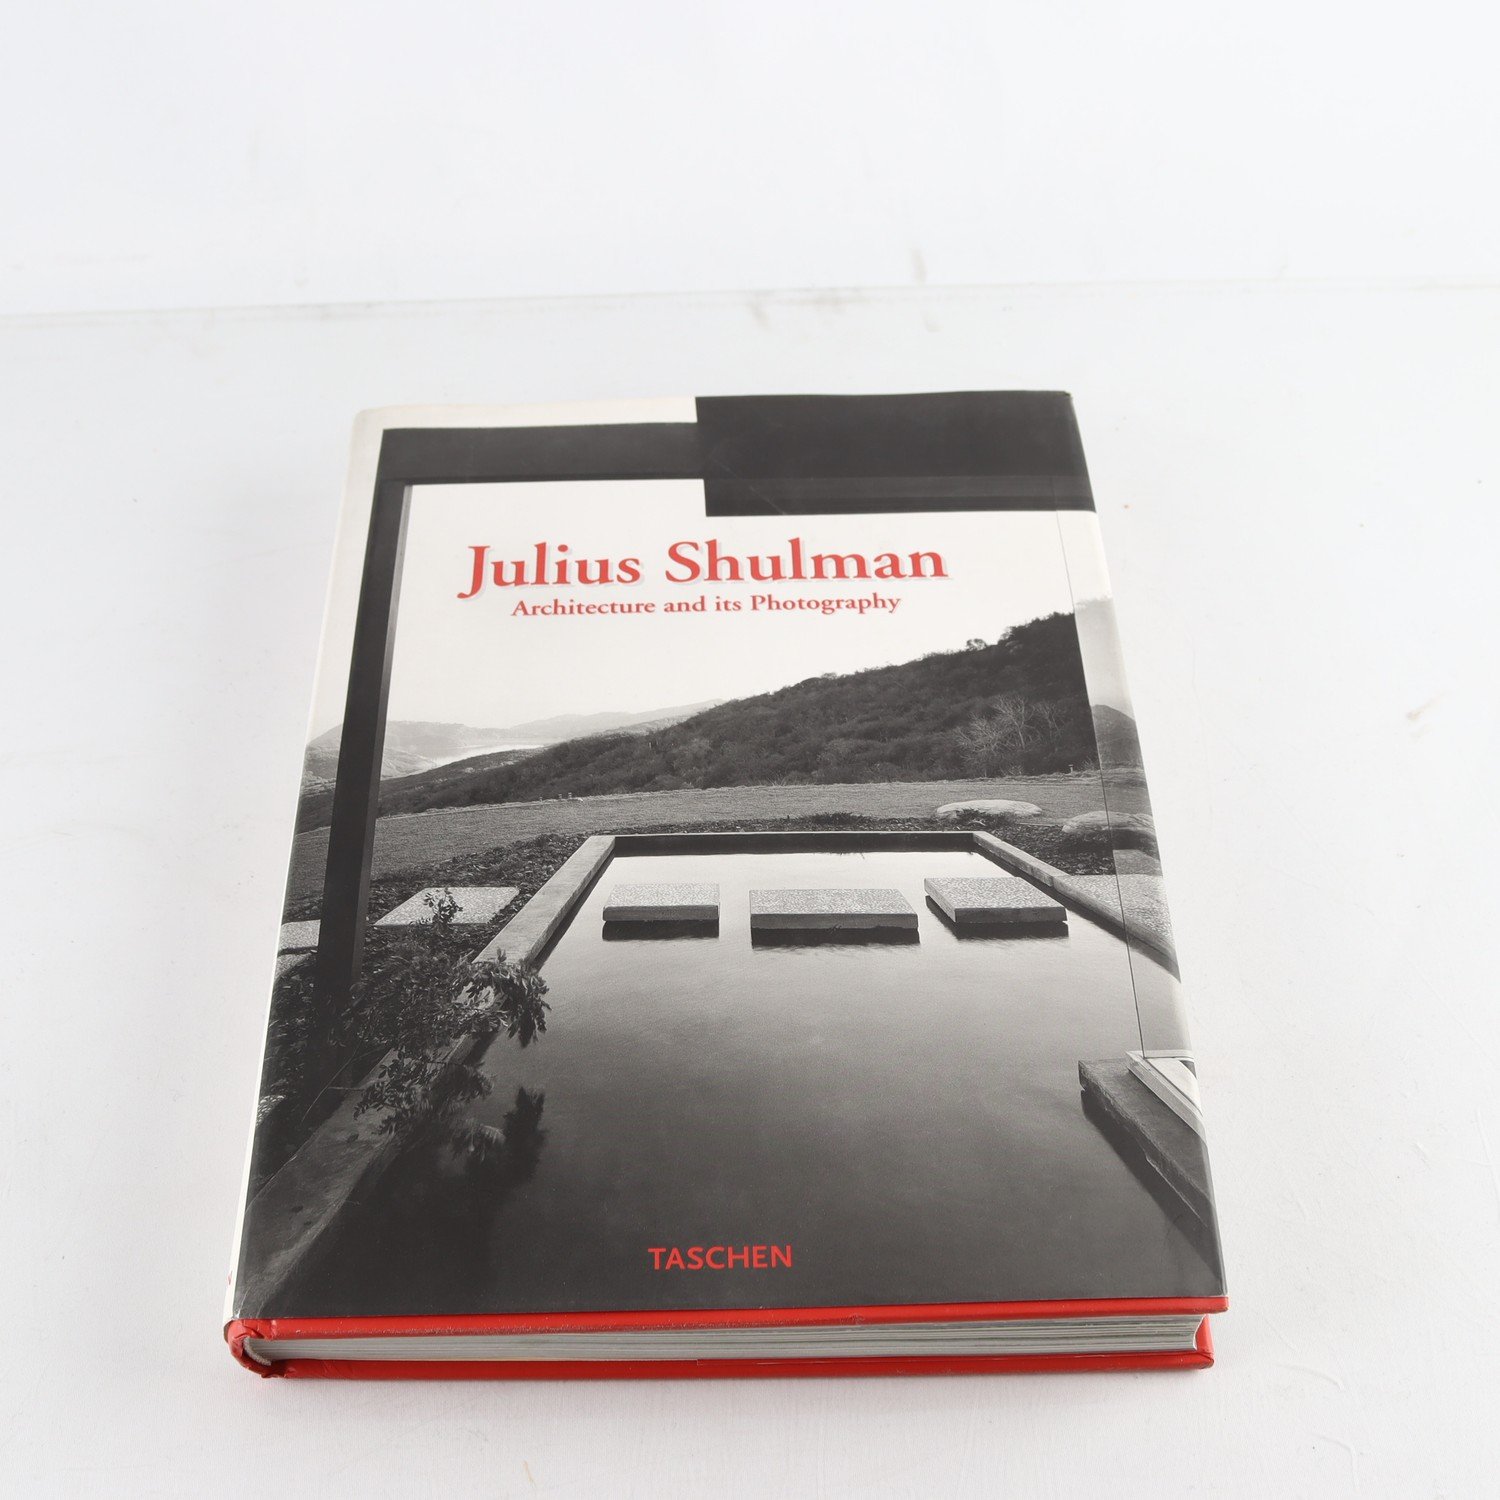 Julius Schulman, Architecture and its Photography